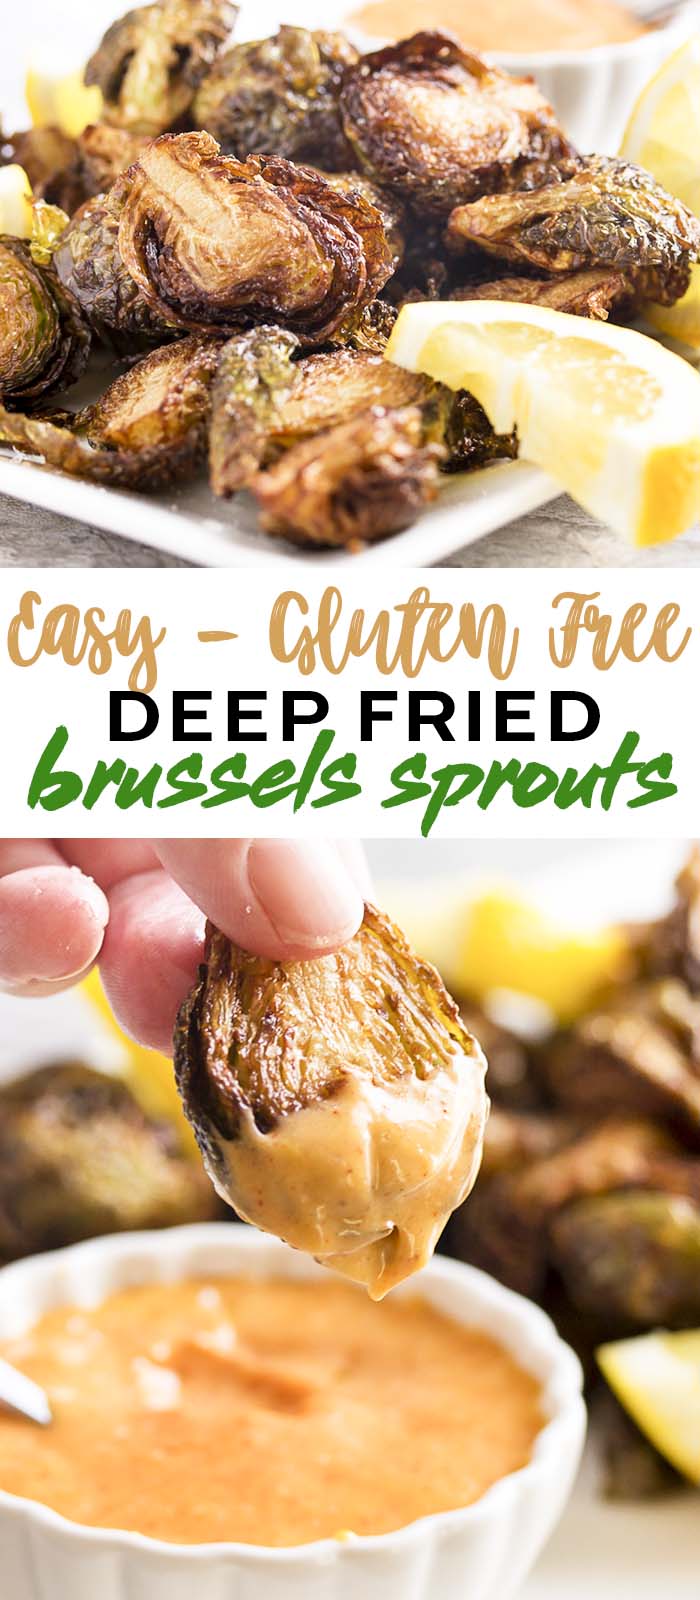 Deep fried Brussels sprouts served with a sweet and tangy sauce are a yummy snack, an addictive appetizer, and a fun Thanksgiving dish. Gluten free and simple to make! | justalittlebitofbacon.com